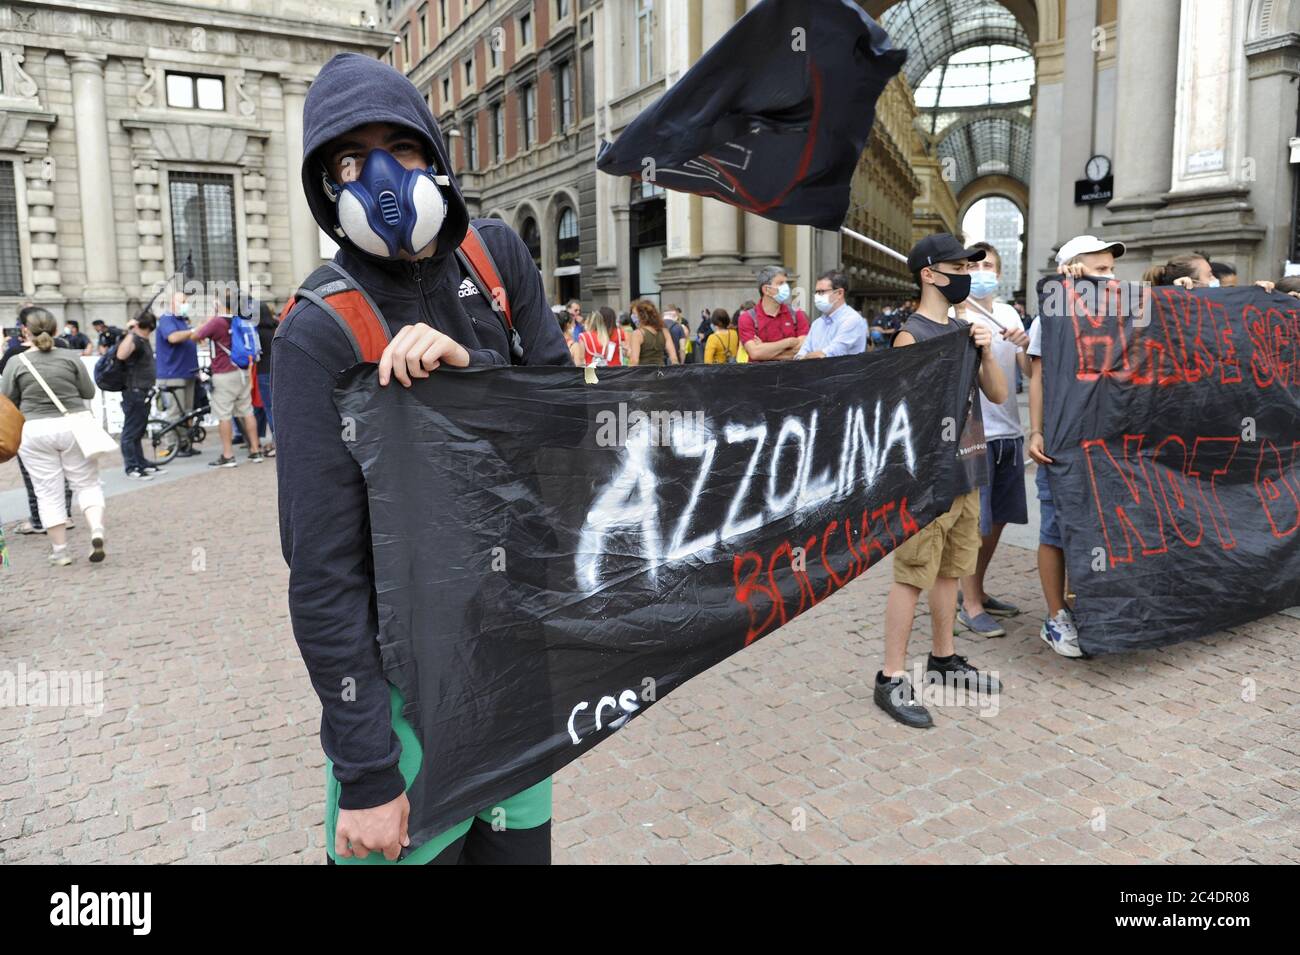 Milan, on 25 June 2020, demonstrations were held in more than sixty Italian cities protesting against the government's decisions for the reopening of schools after the blockade due to the Covid-19 epidemic, and the scarcity of economic resources allocated. The protest in Milan, as elsewhere, was attended by teachers, professors, parents and students of all ages. Stock Photo